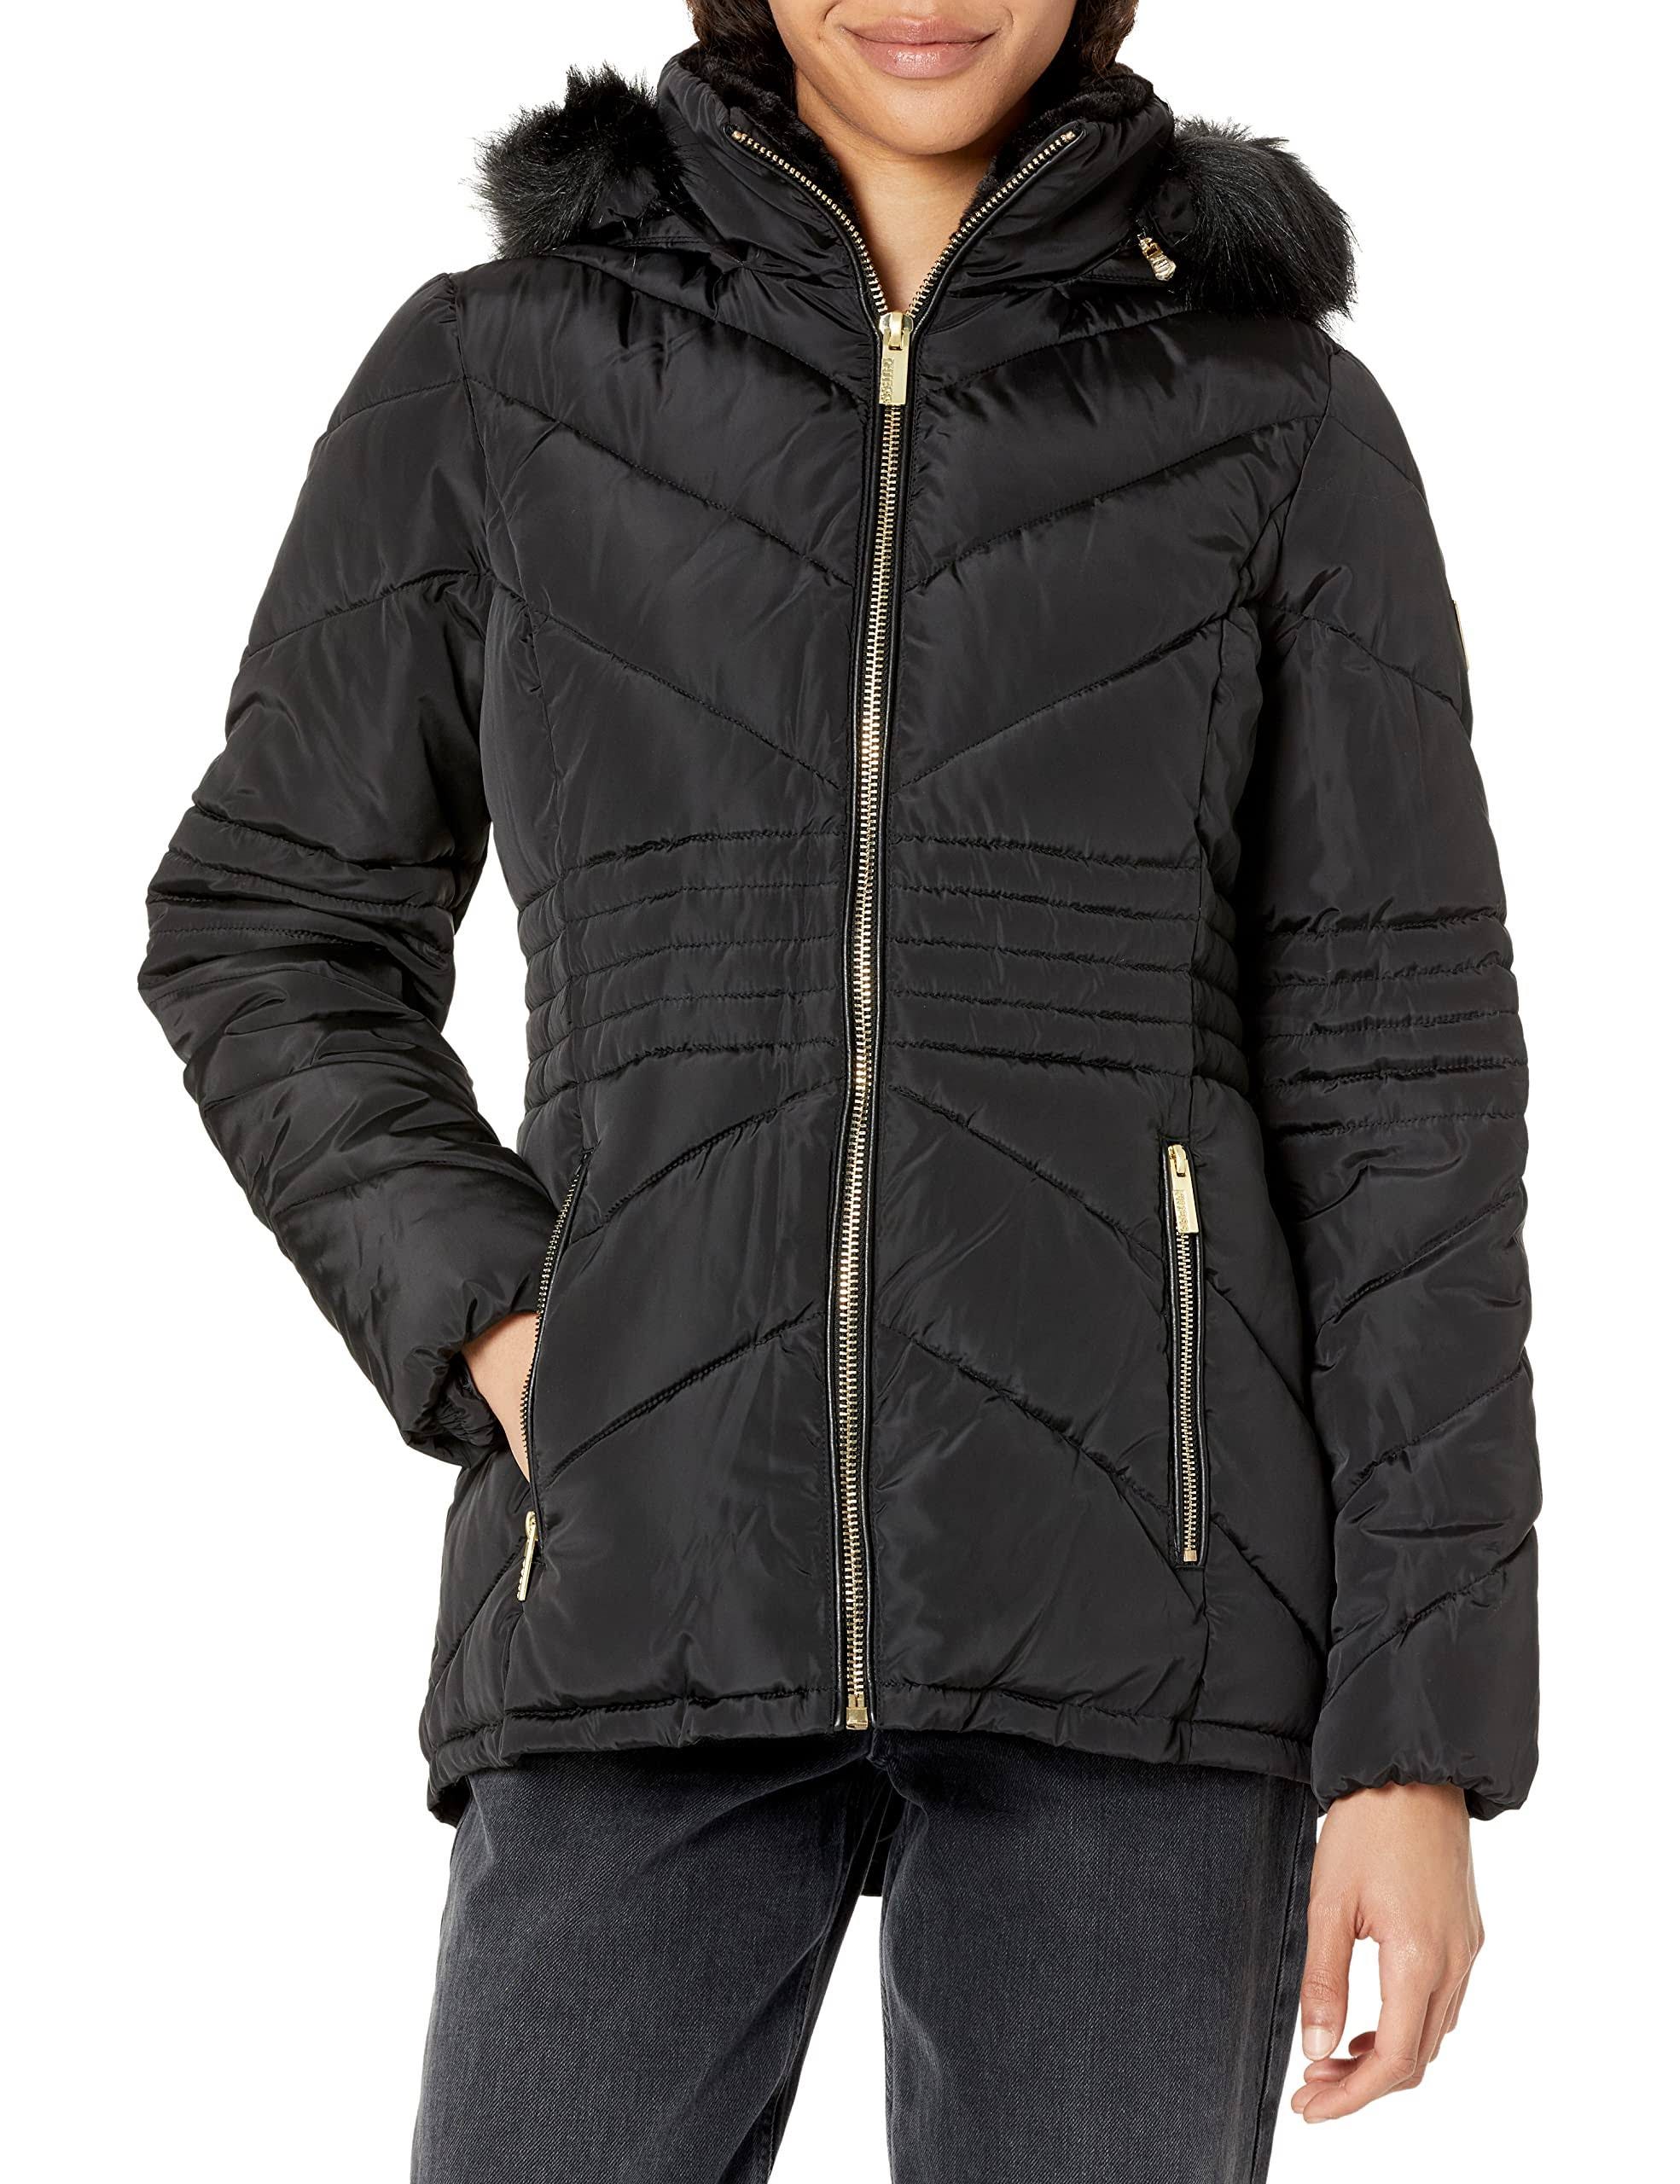 Luxurious Black Hooded Puffer Jacket with Faux Fur Trim | Image